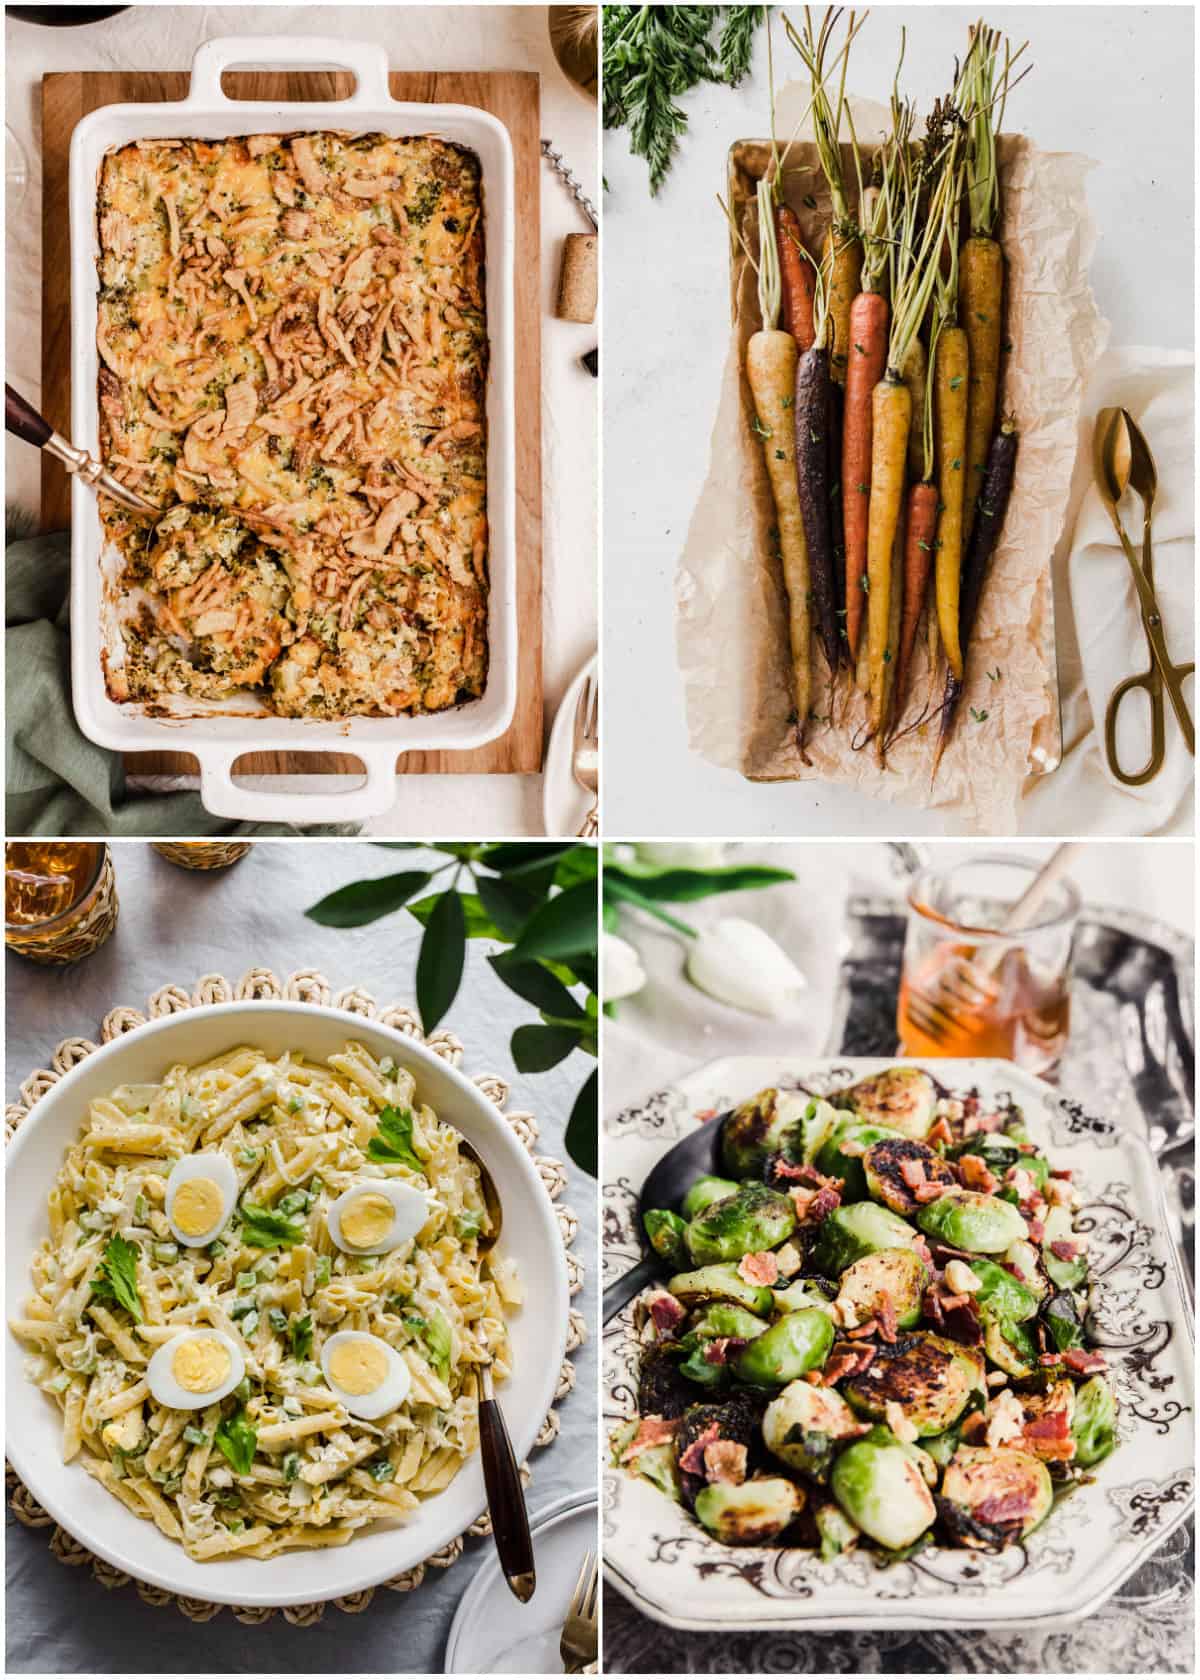 photo collage with casserole, carrots, pasta salad, and brussels sprouts.